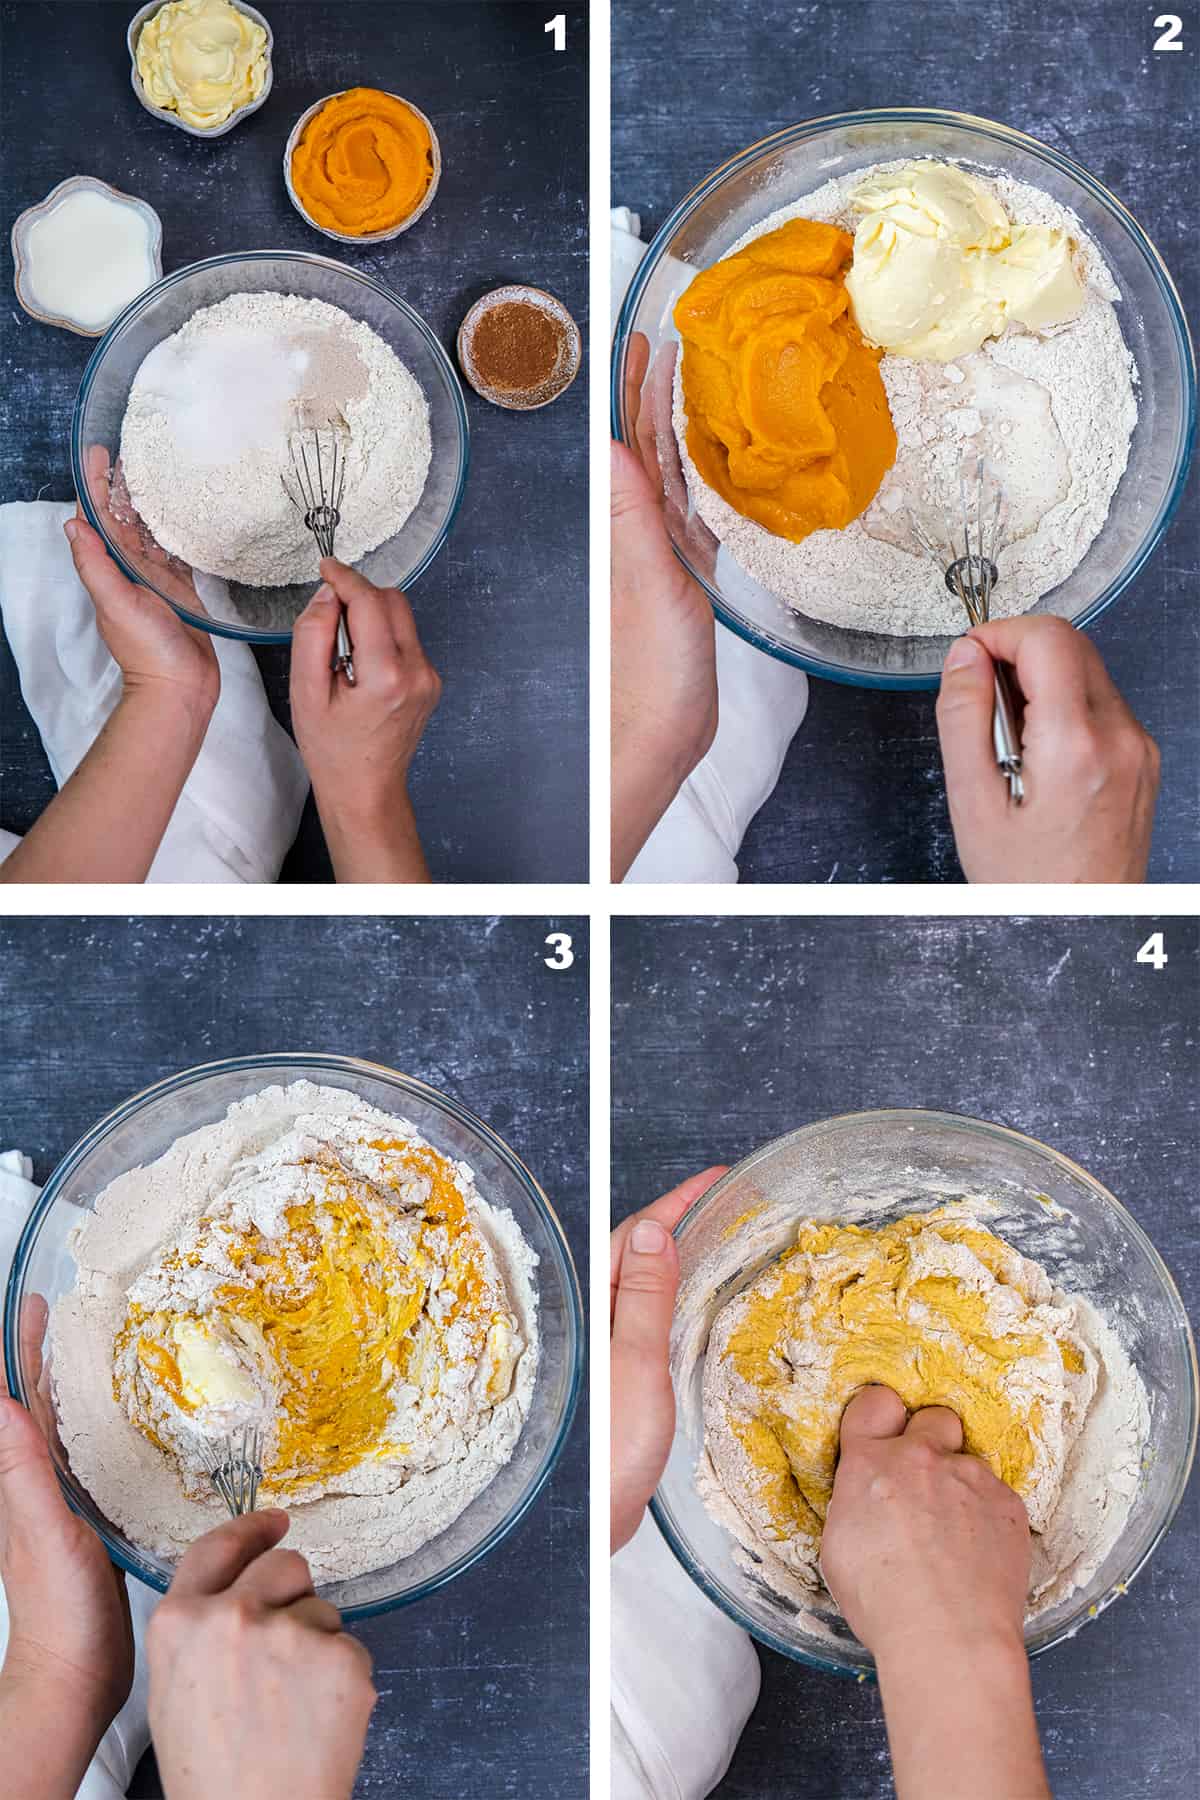 Pictures showing hands combining ingredients in a glass mixing bowl and a hand whisk.